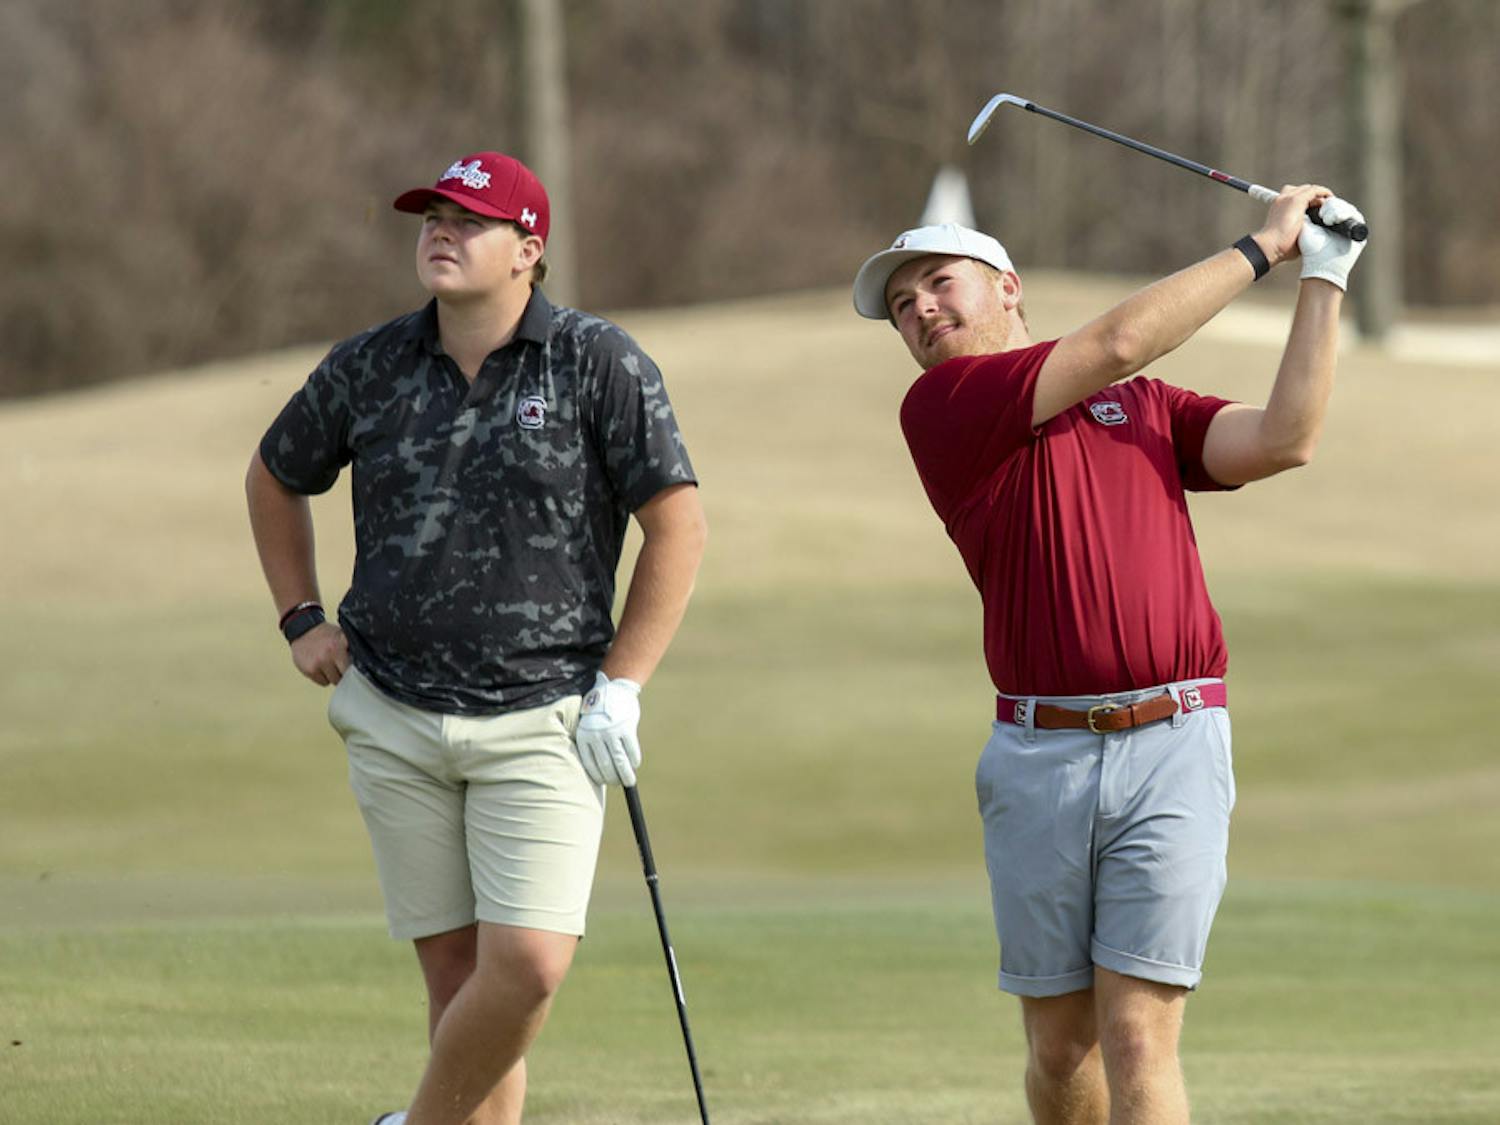 Fifth-year golfer Evans Lewis (on left) and redshirt senior golfer Lansdon Robbins (on right) watch the ball after Robbins wedges it off the green during practice on Feb. 8, 2023. Robbins transferred to South Carolina from UNC Wilmington this year after placing second on the team in low strokes and being named a member of the Colonial Athletic Association Conference’s Second Team for back-to-back years in 2021 and 2022.&nbsp;